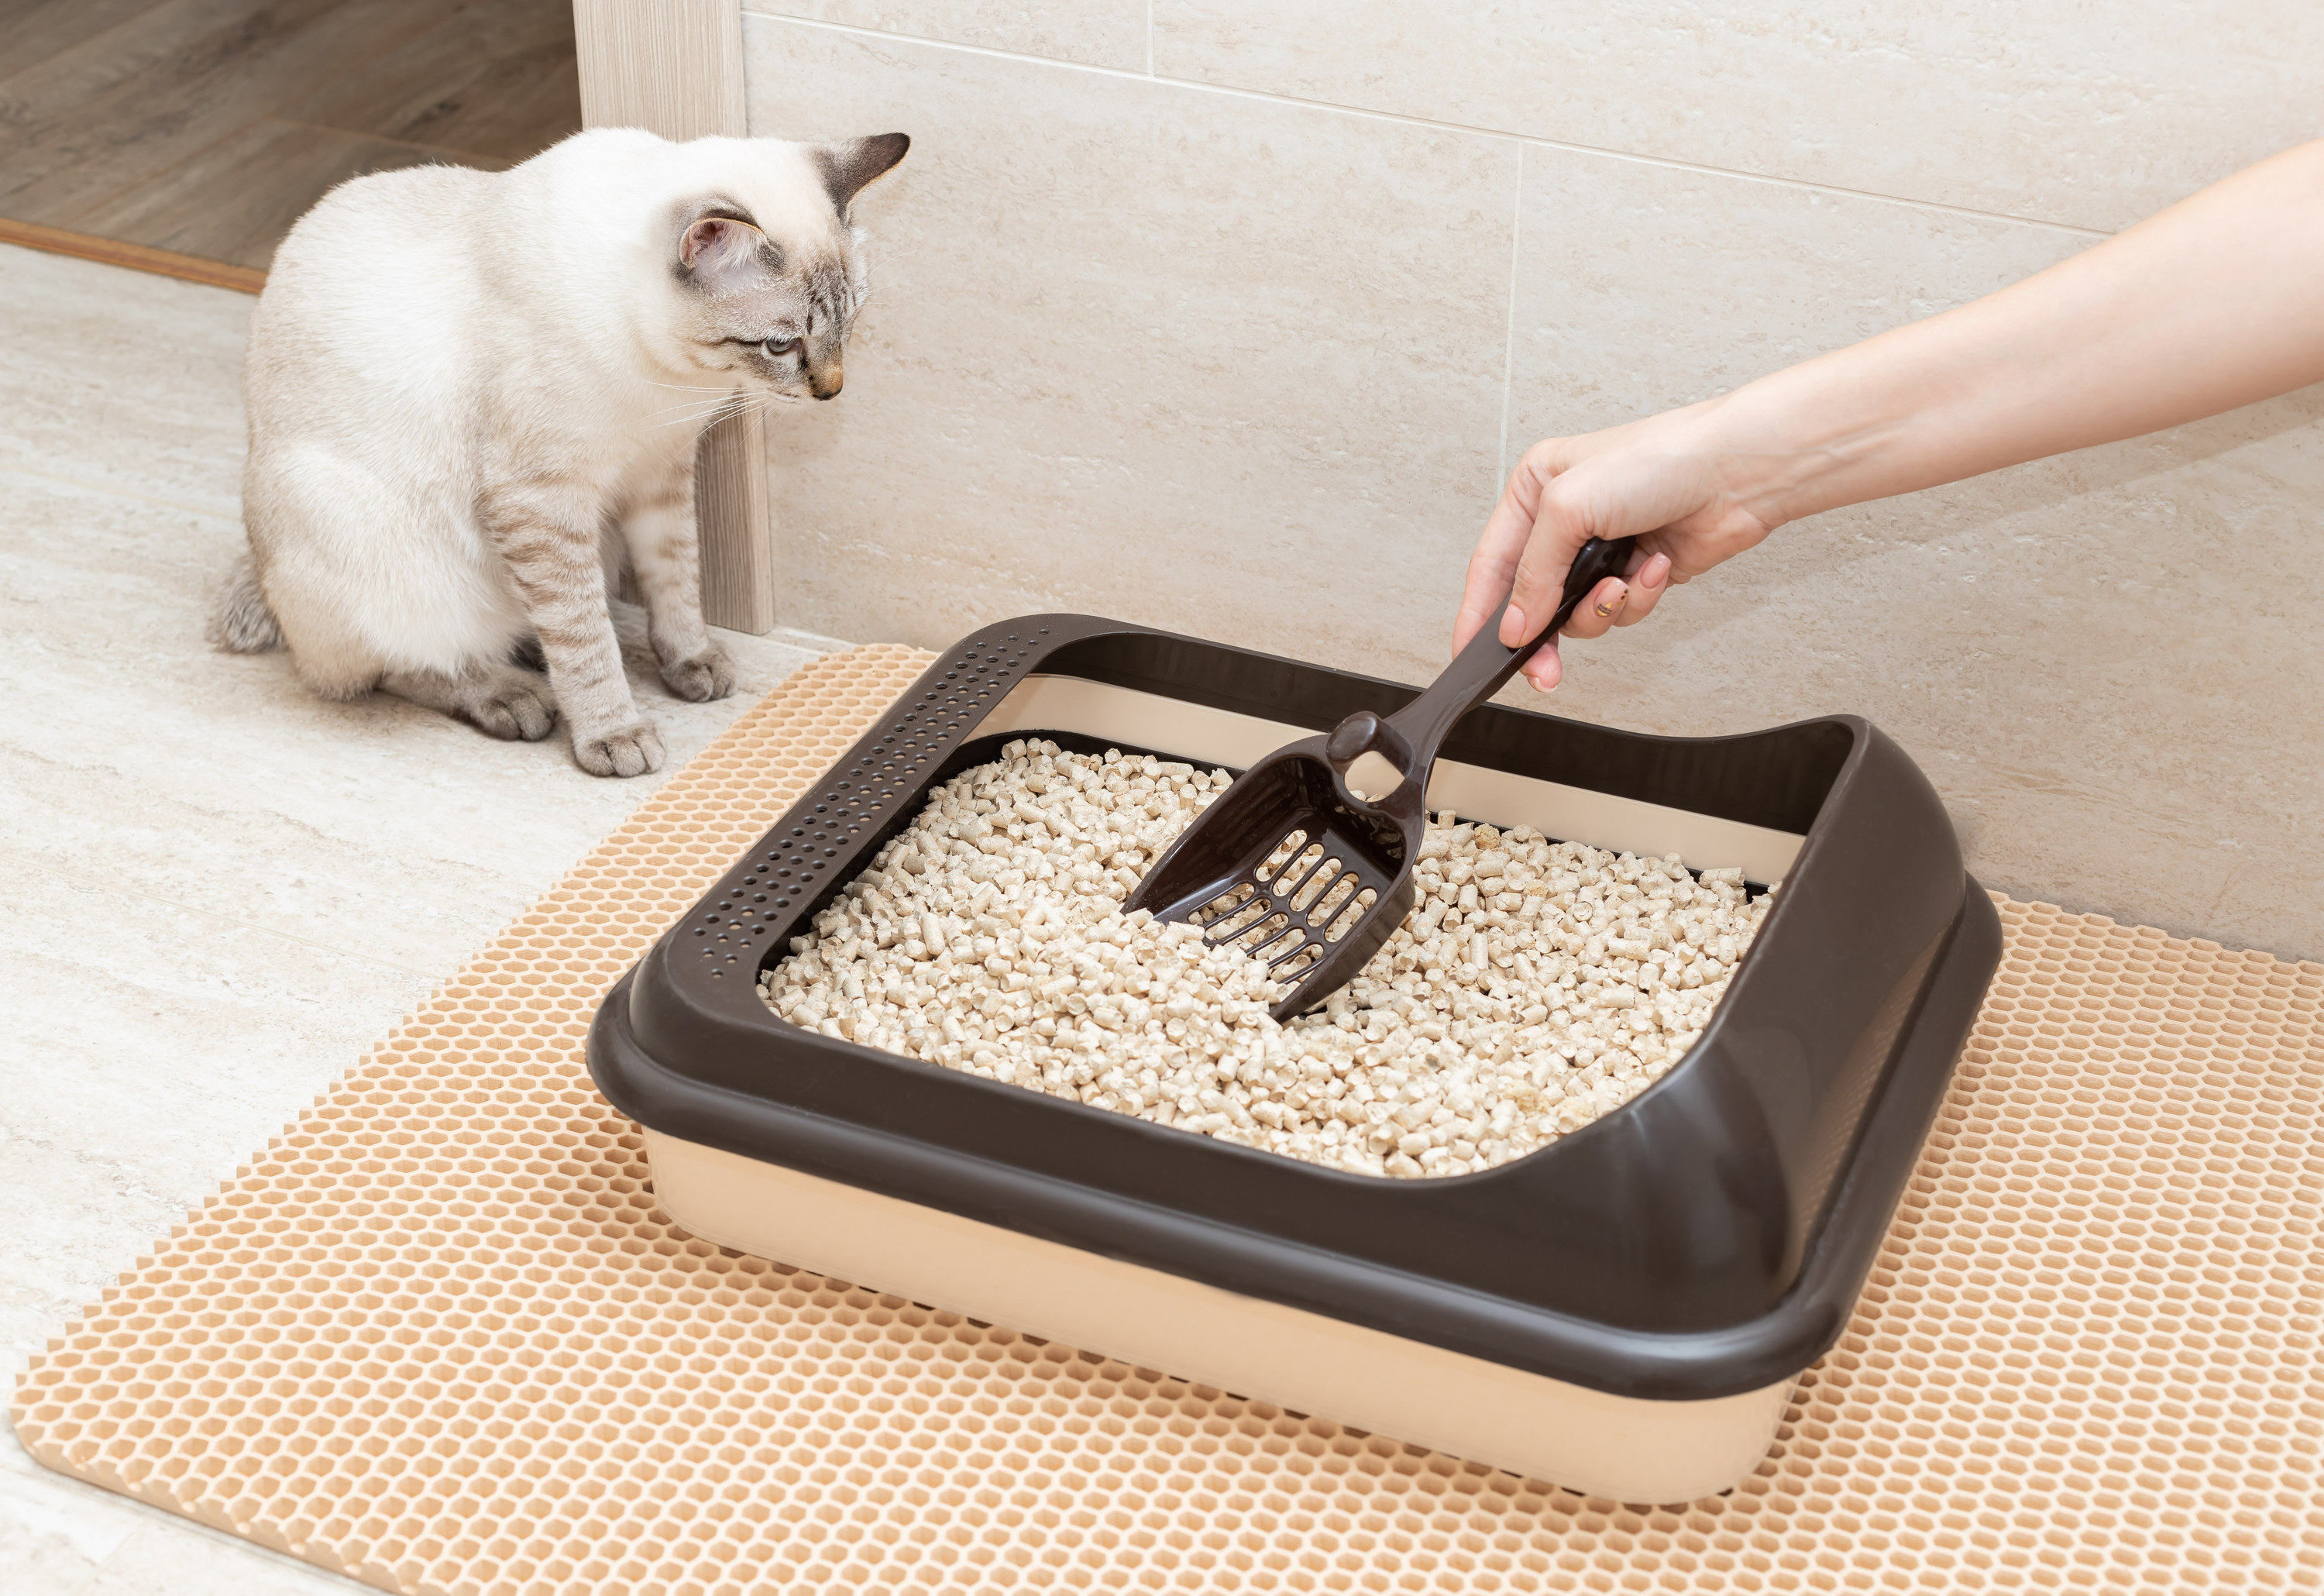 A person cleaning the litter box as a cat watches